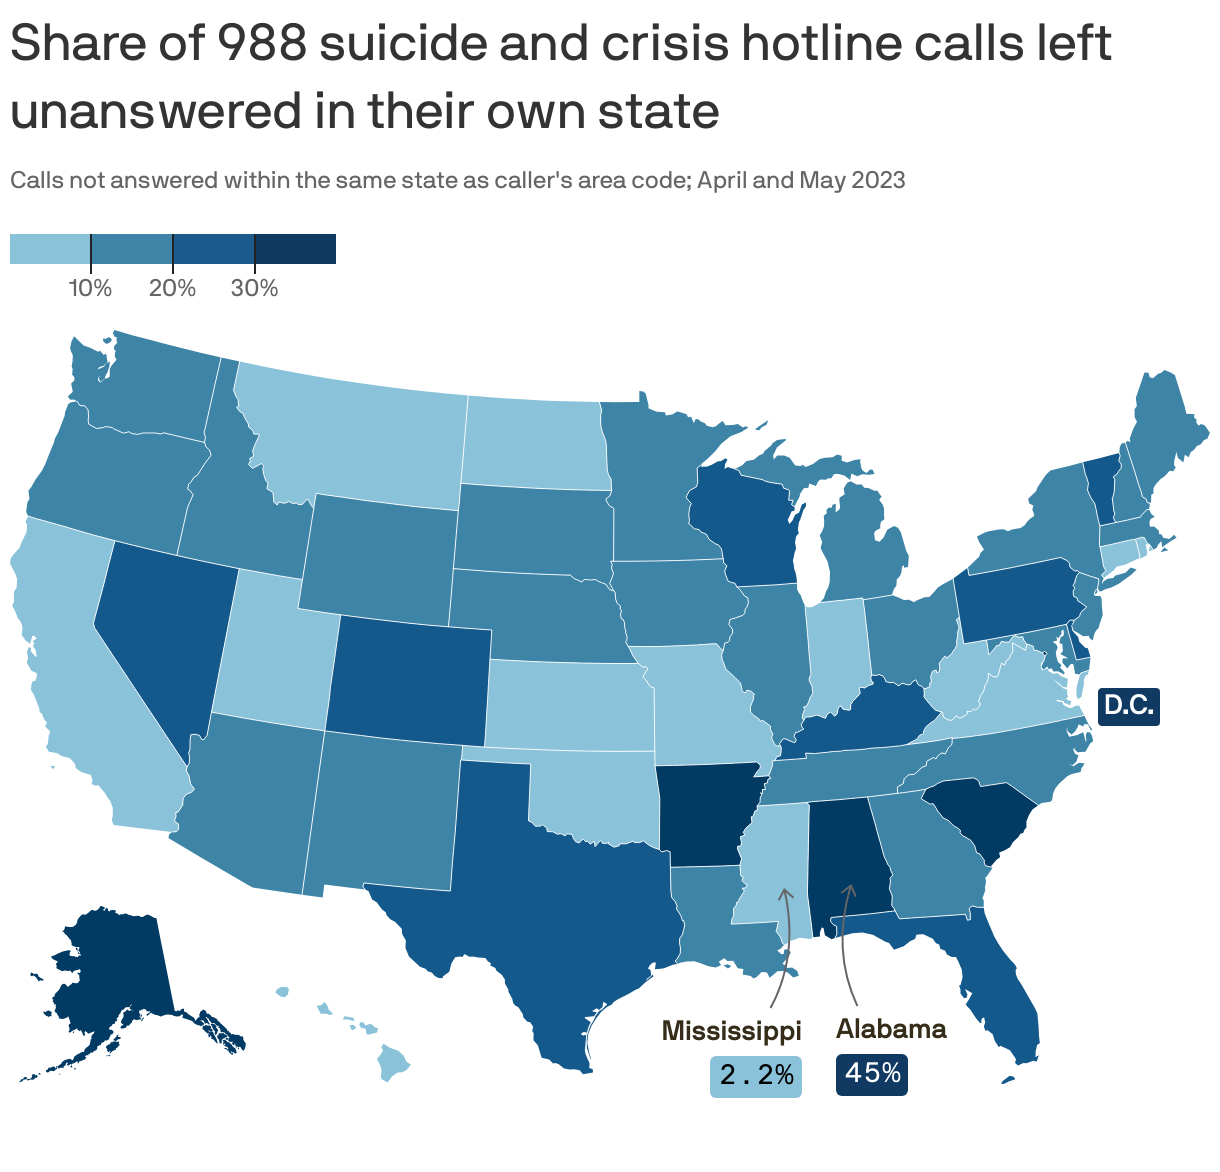 Share of 988 suicide and crisis hotline calls left unanswered in their own state